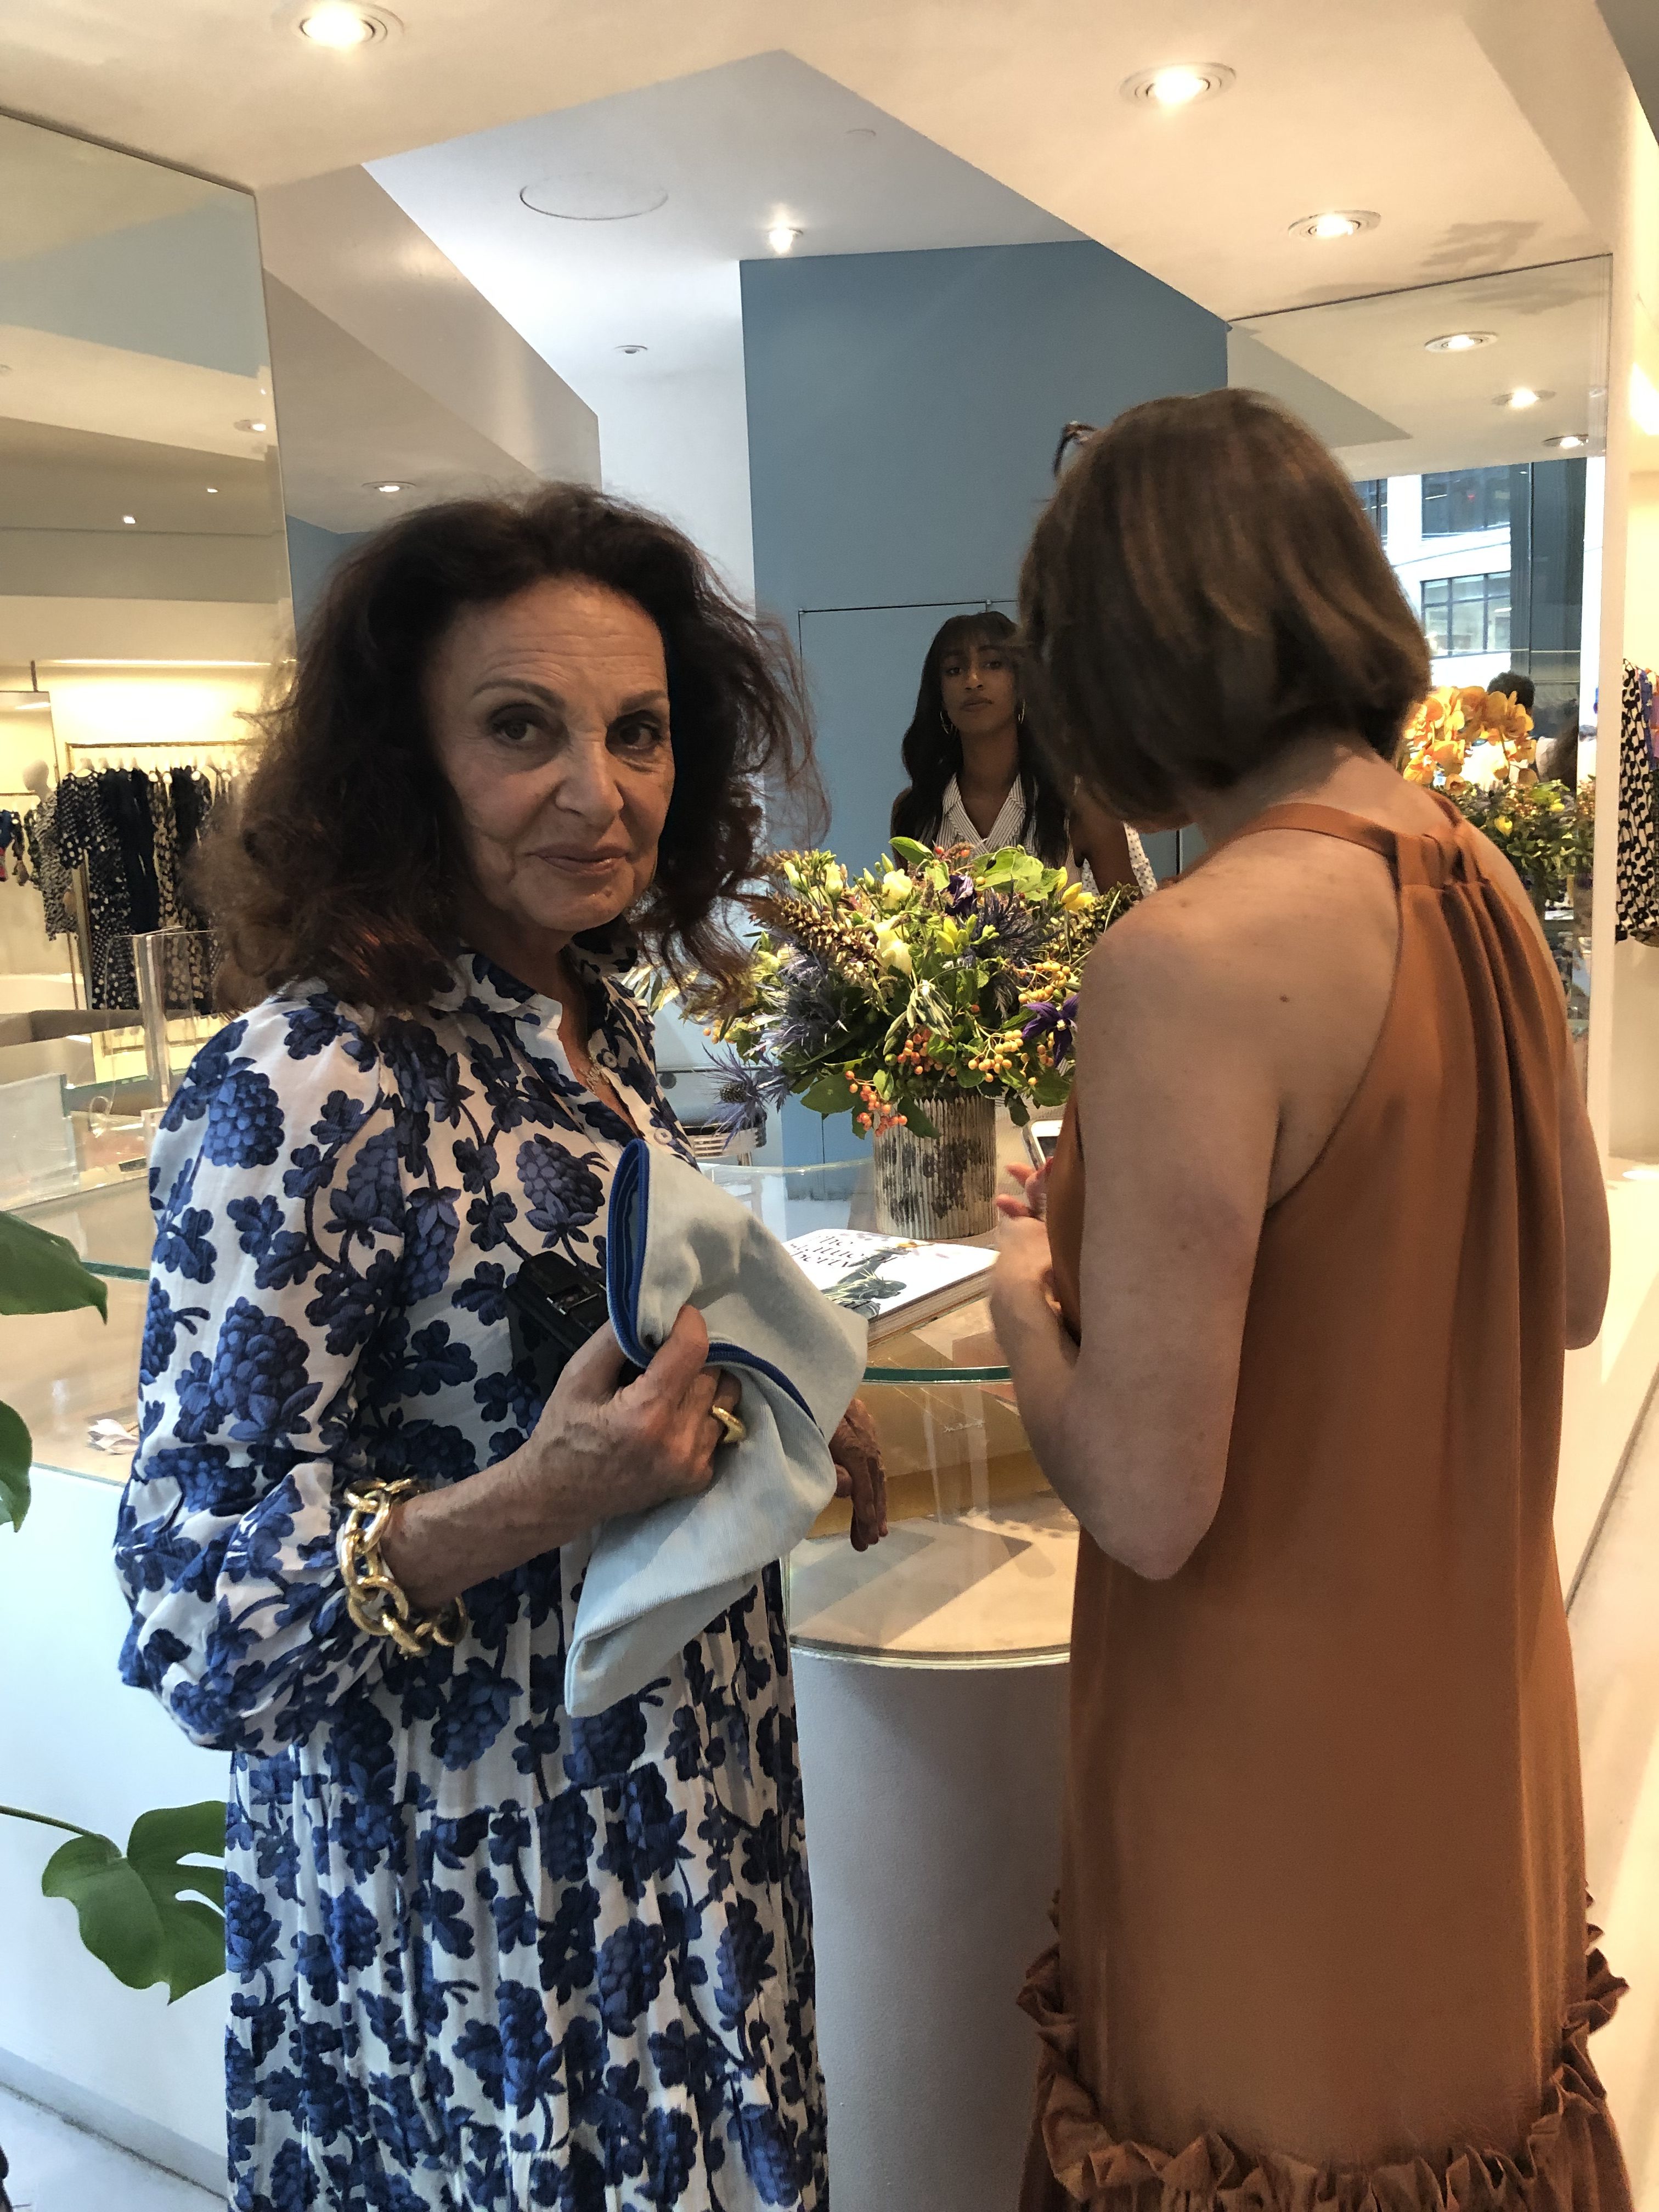 Diane von Furstenberg wearing a blue & white dress with another woman in a rust dress